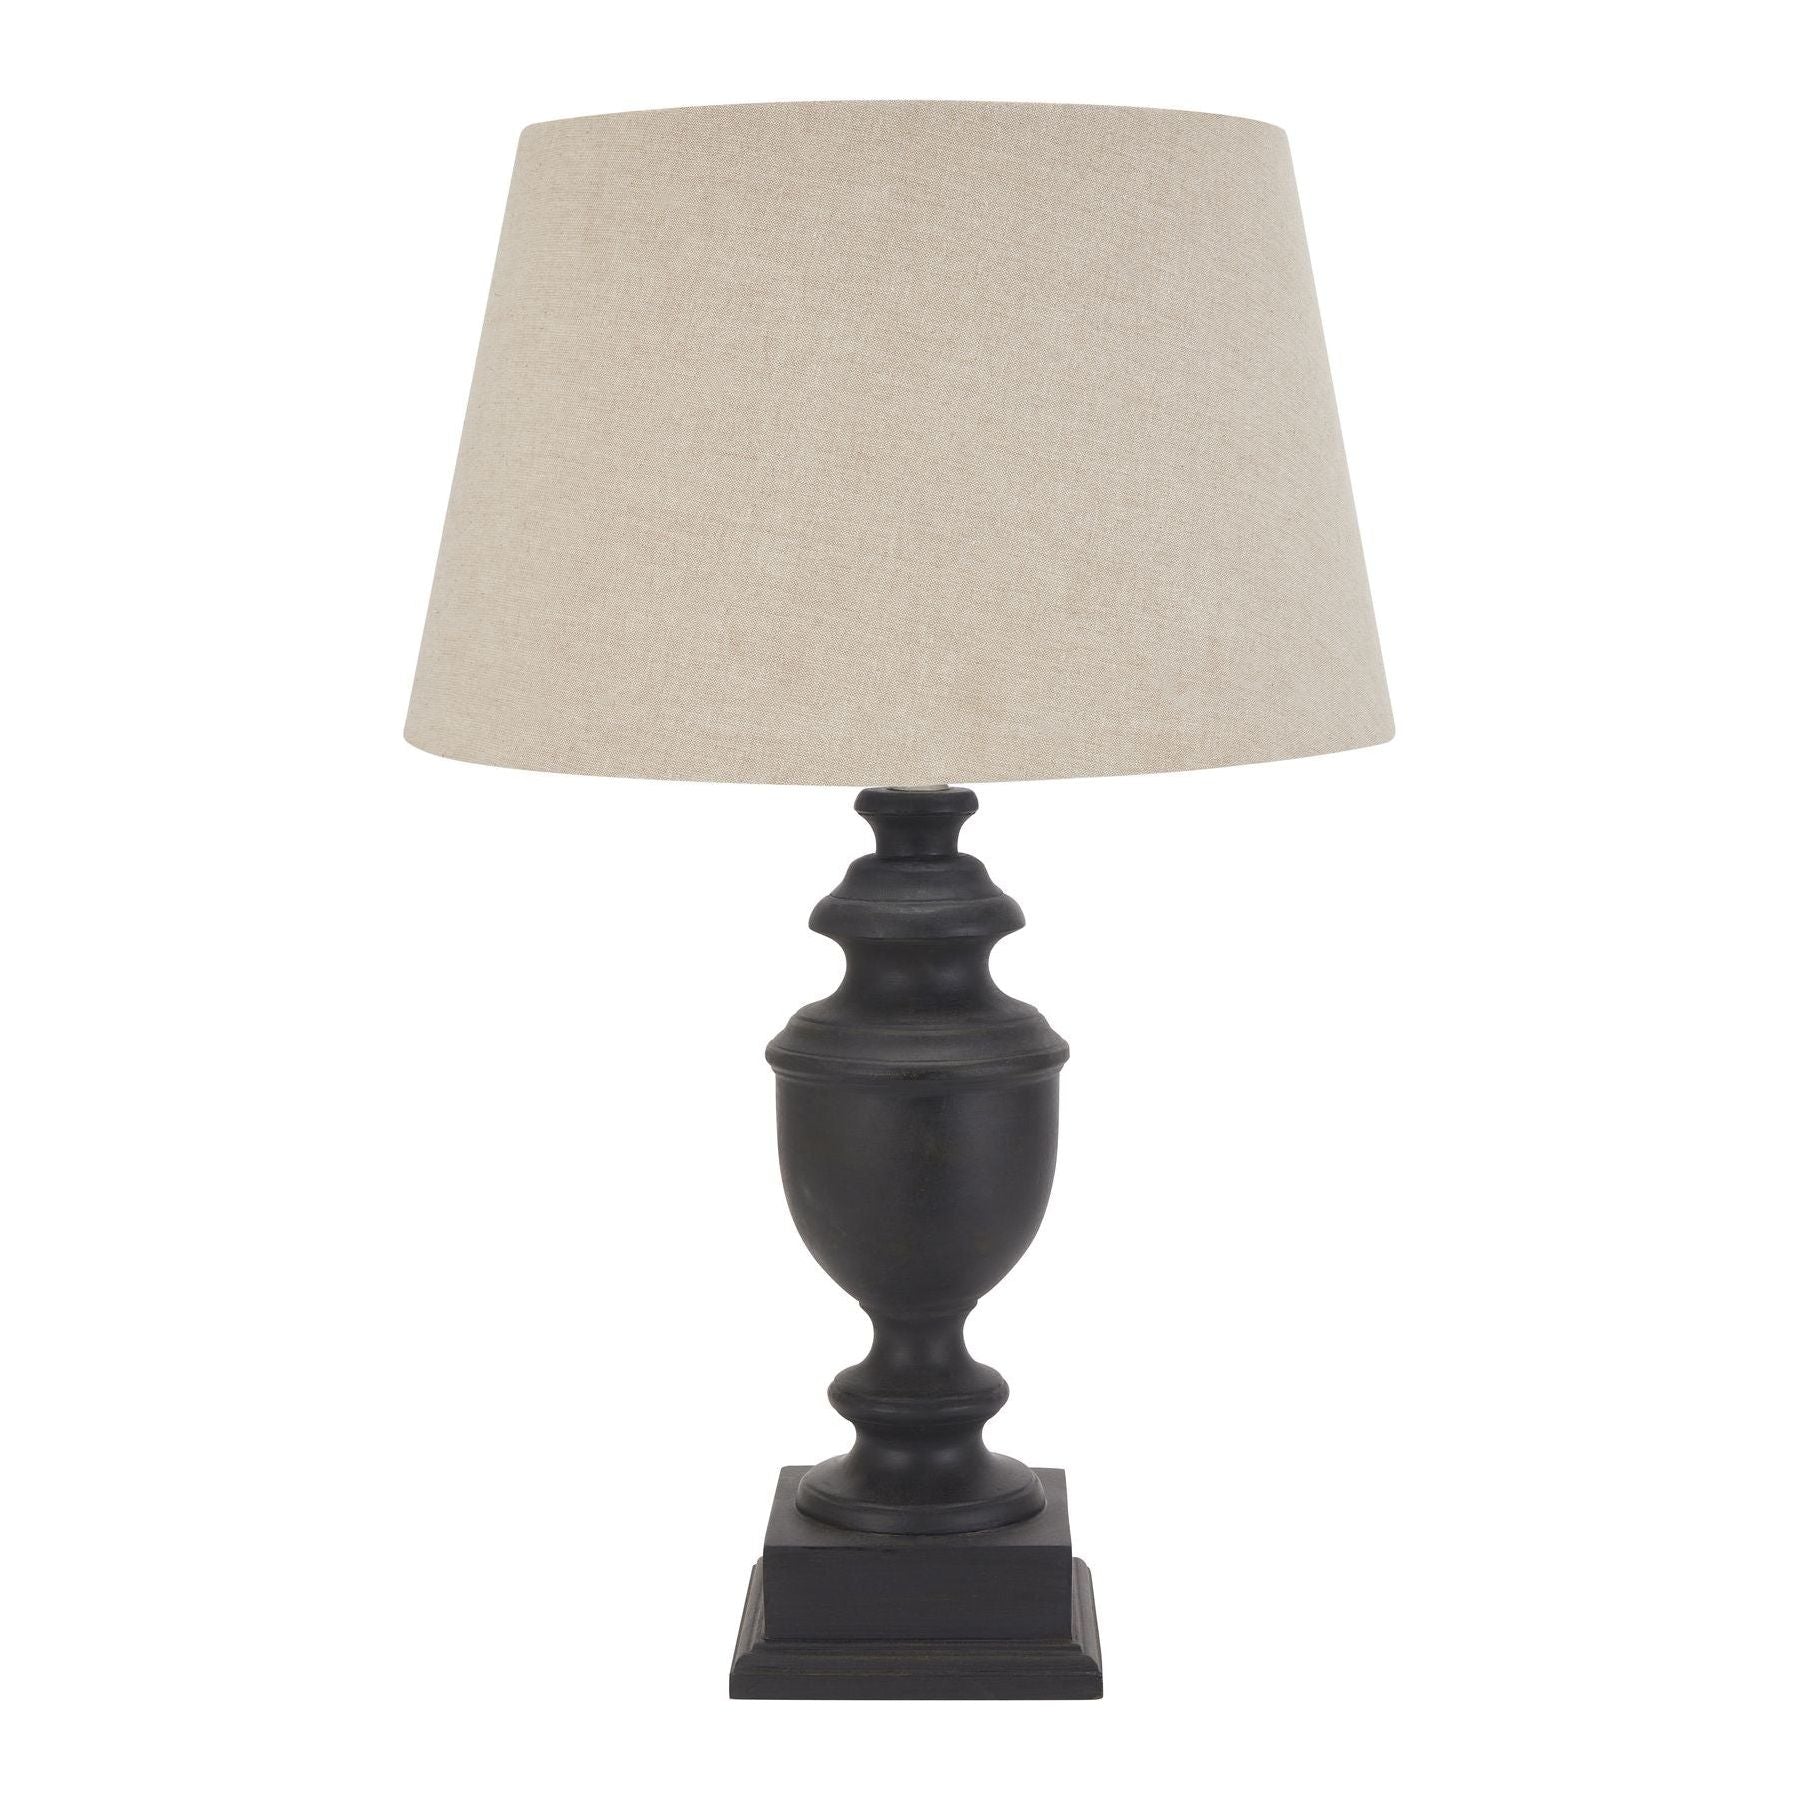 Delaney Collection Grey Urn Lamp With Linen Shade - Ashton and Finch